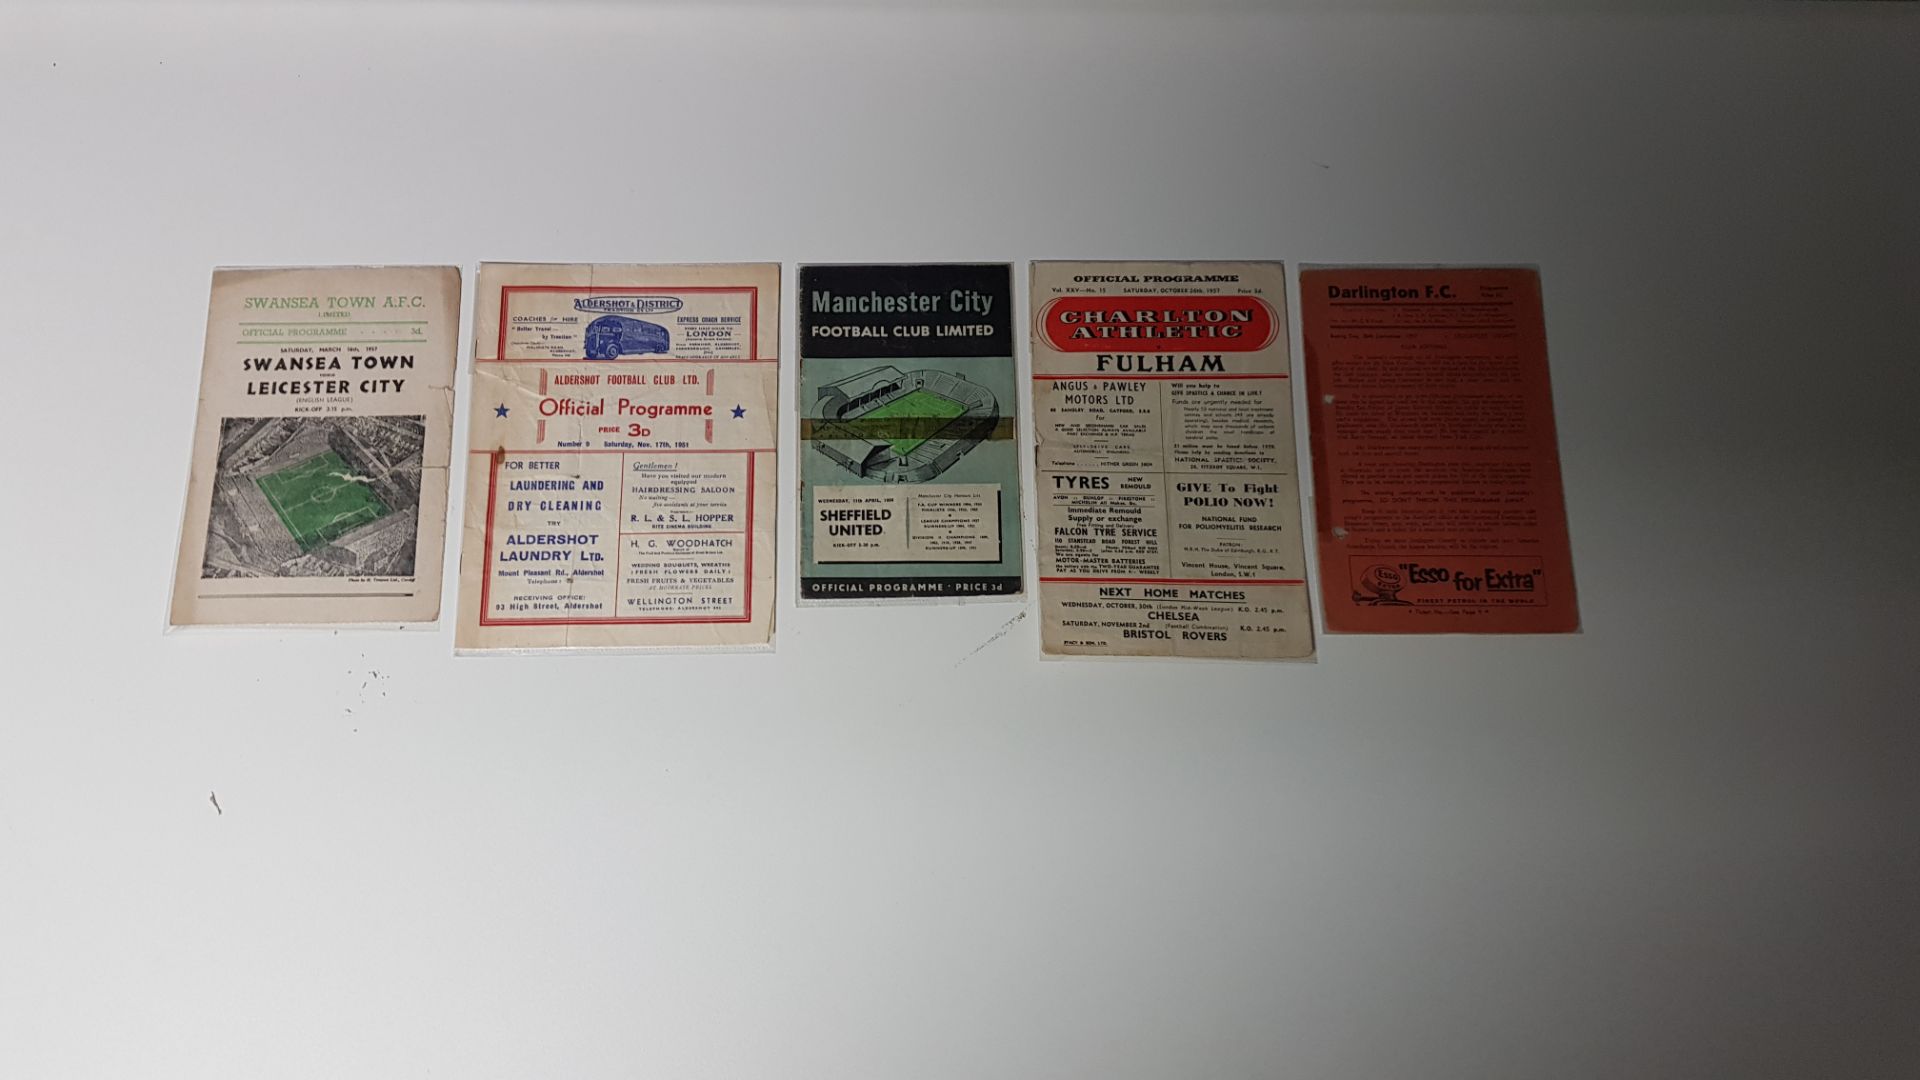 5 X OTHER CLUB PROGRAMMES IN VERY GOOD CONDITION TO INCLUDE - 17.11.51 - ALDERSHOT VS TORQUAY UNITED - Image 2 of 2